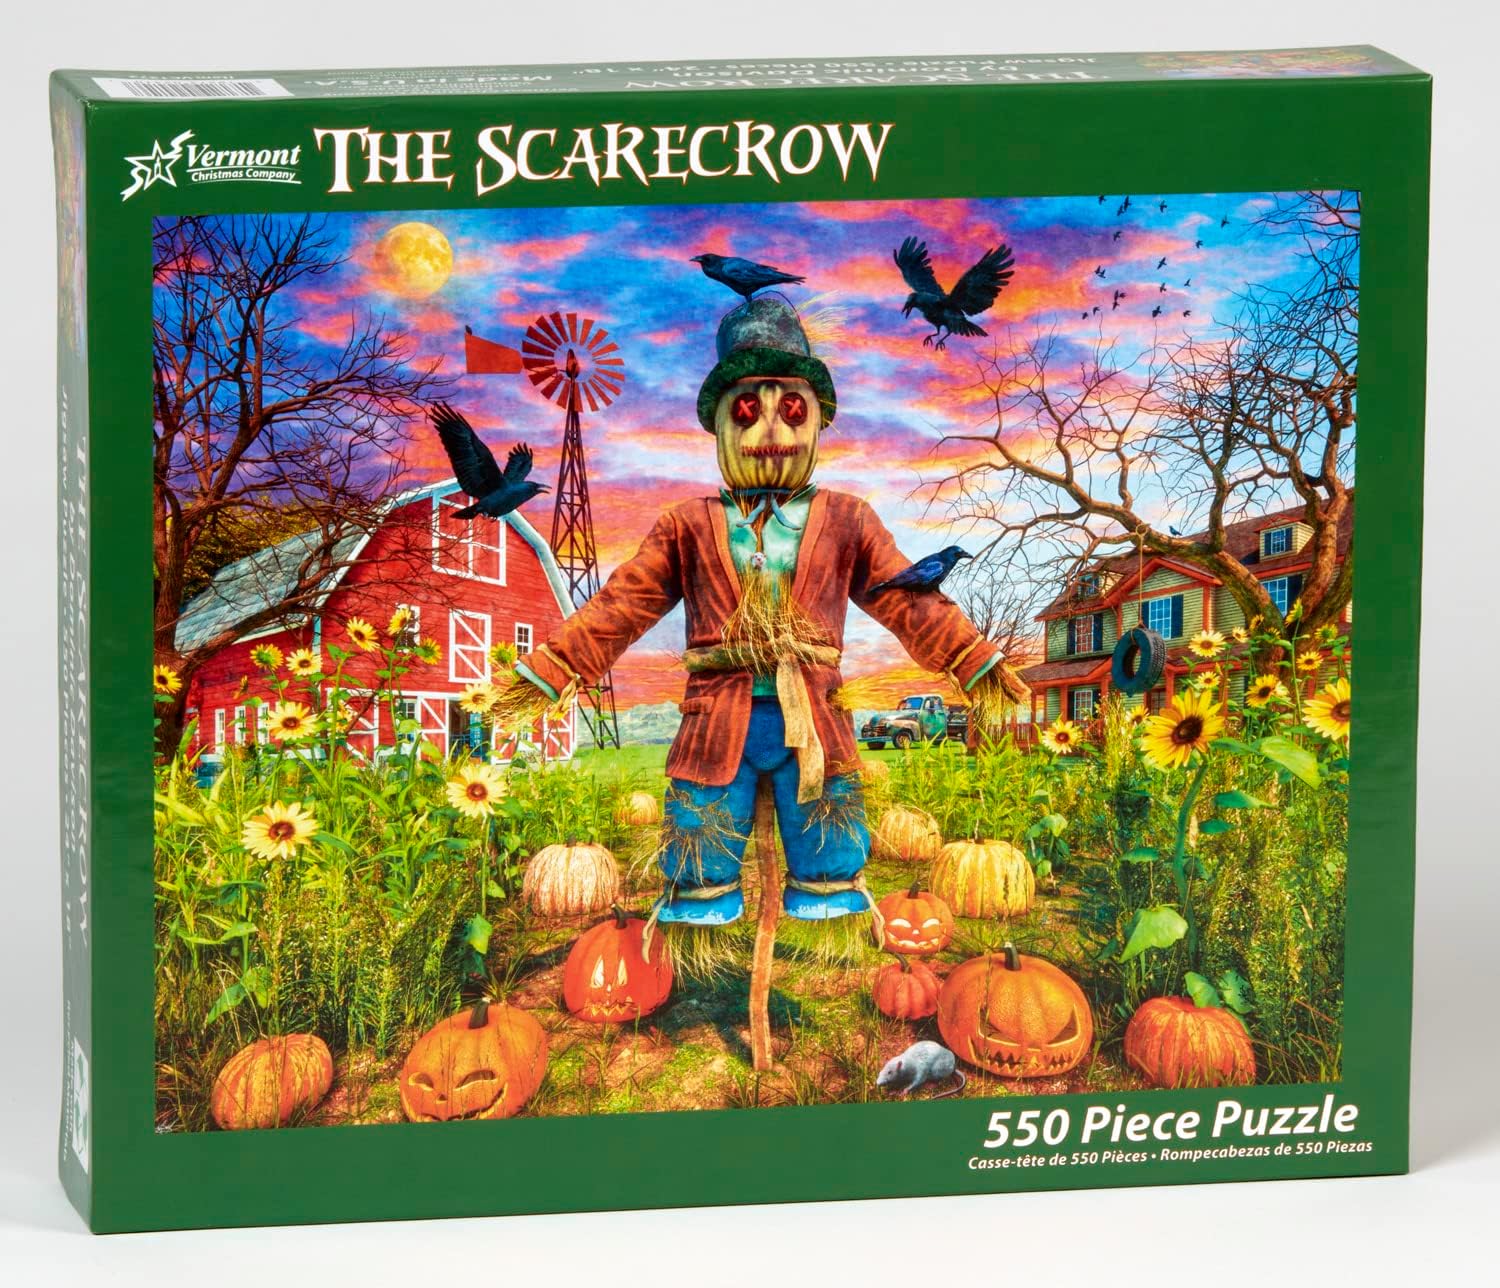 Scarecrow　The　RoseWillie　Christmas　550-Piece　Puzzle　Vermont　by　Company